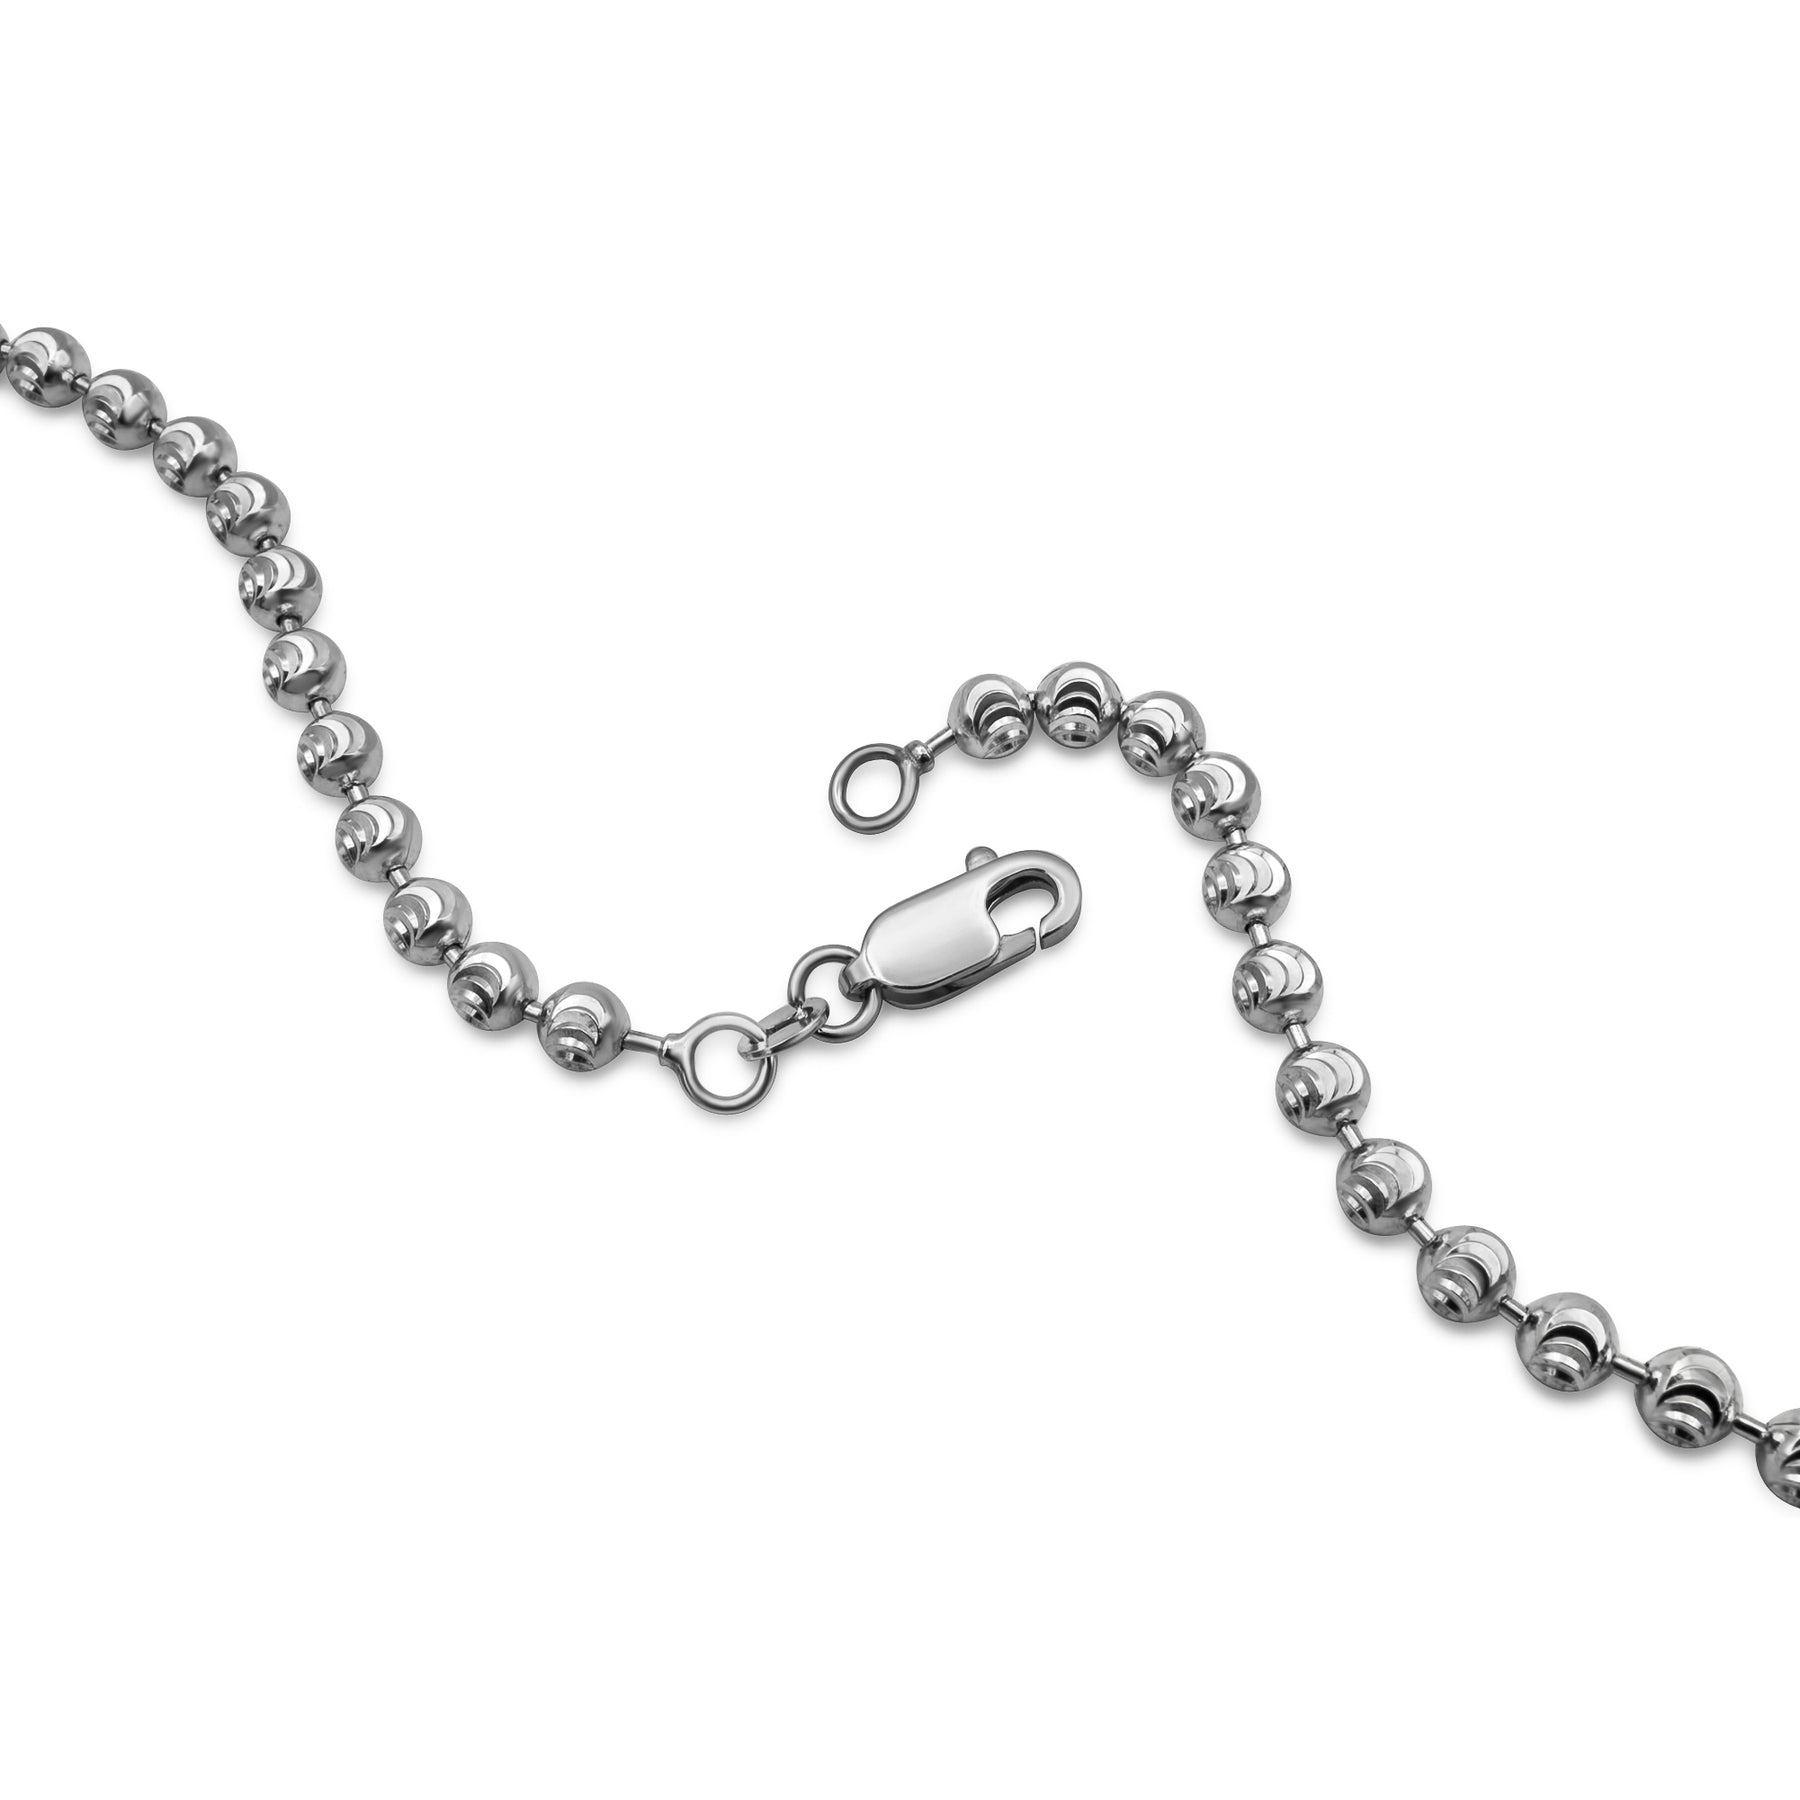 14K Solid White Gold Ball Bead Chain 4mm 26 Inches - 32.26 Grams (Long) / White Gold - Nyc Luxury